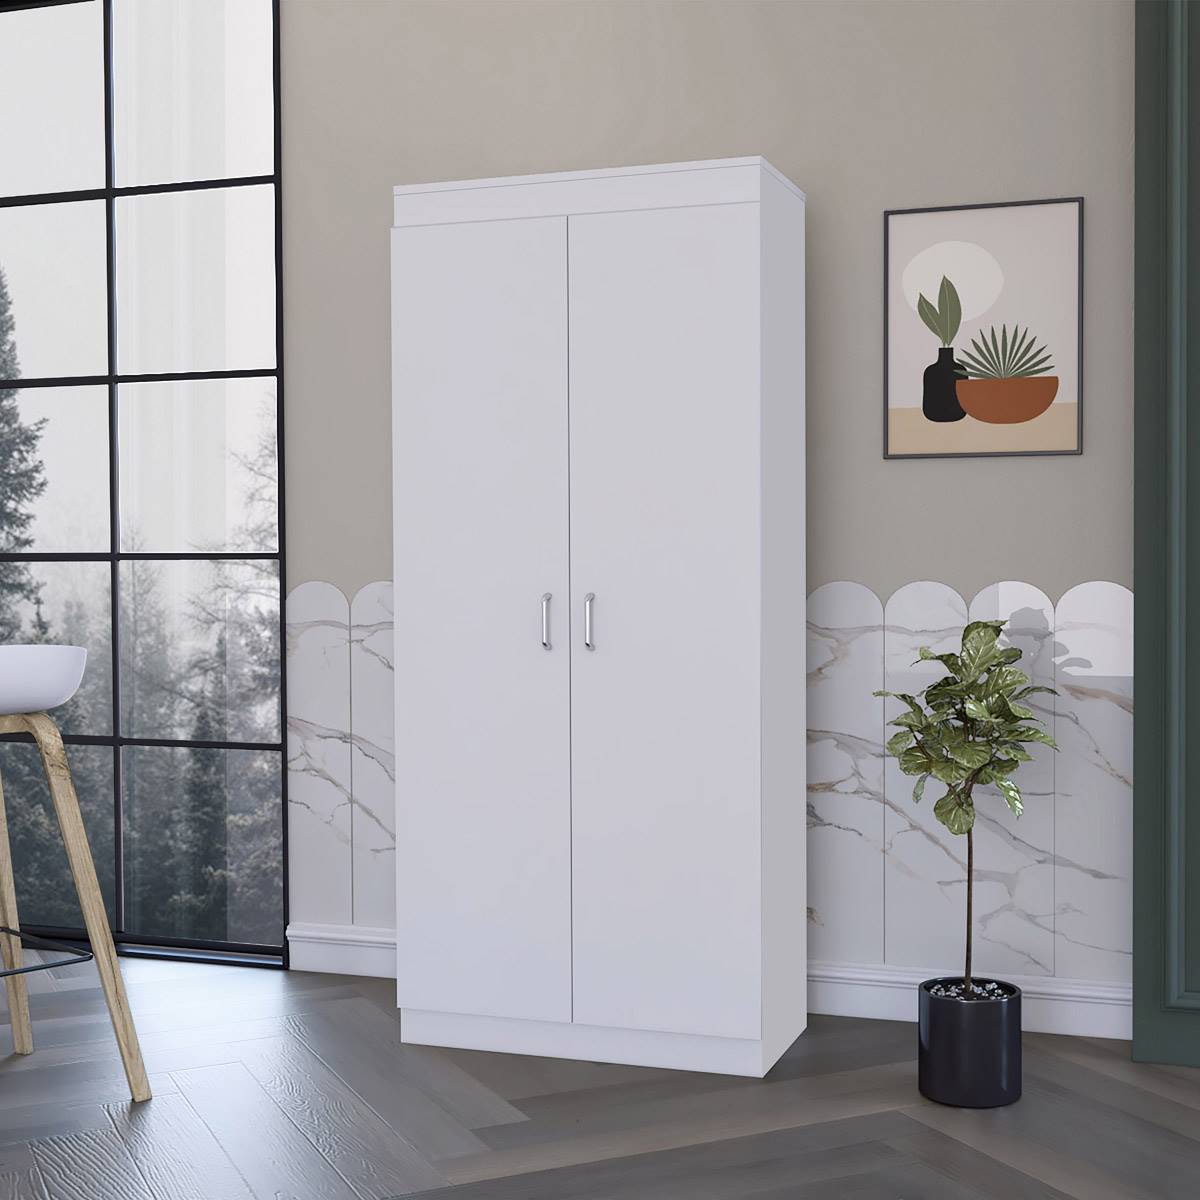 FM FURNITURE Albany White Pantry Cabinet